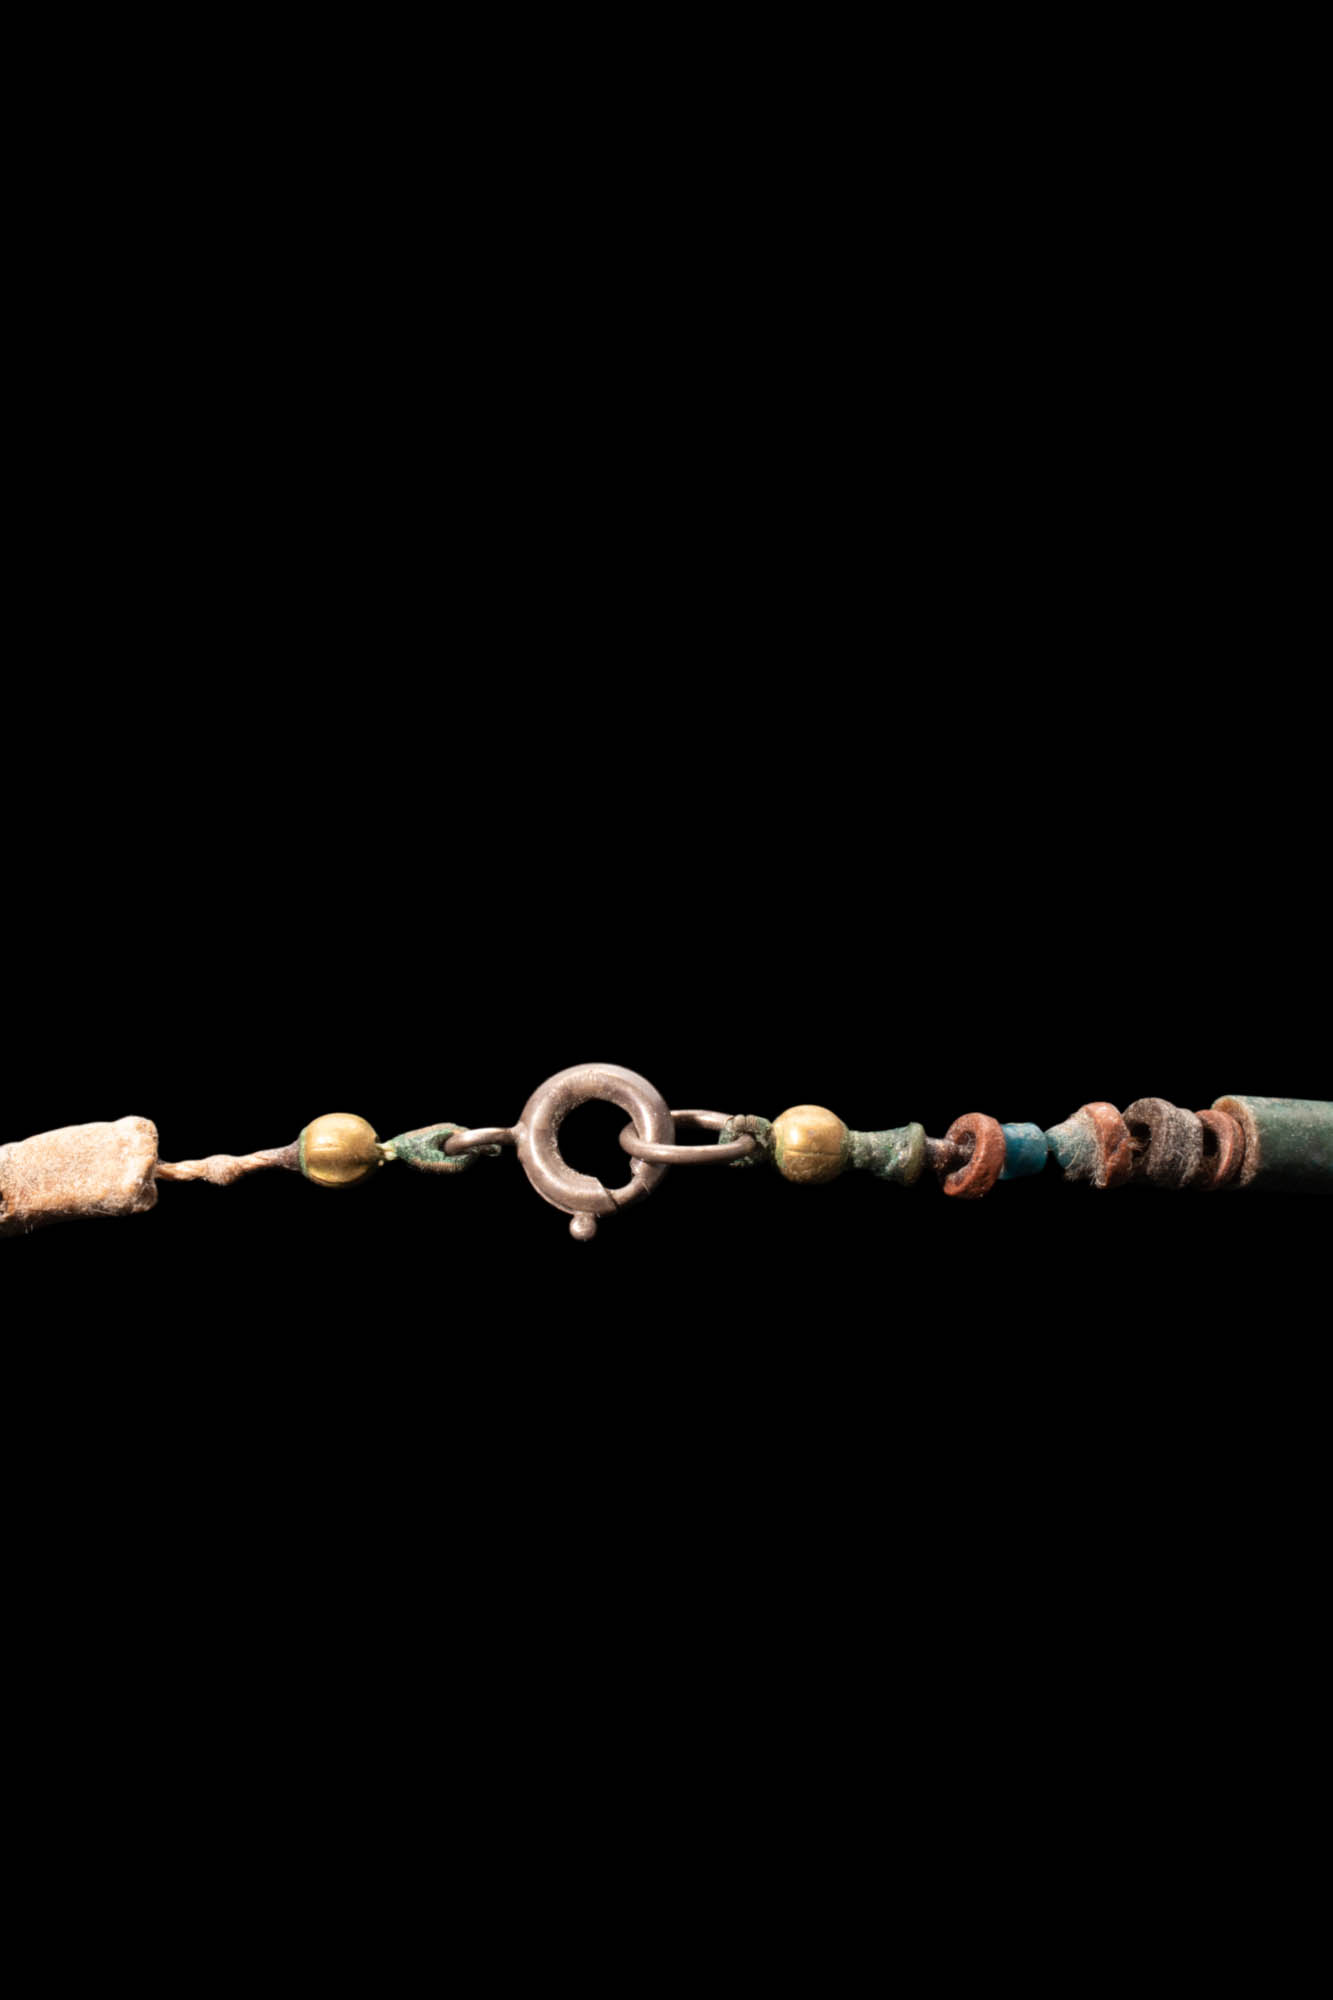 NEW KINGDOM EGYPTIAN FAIENCE NECKLACE - Image 5 of 5